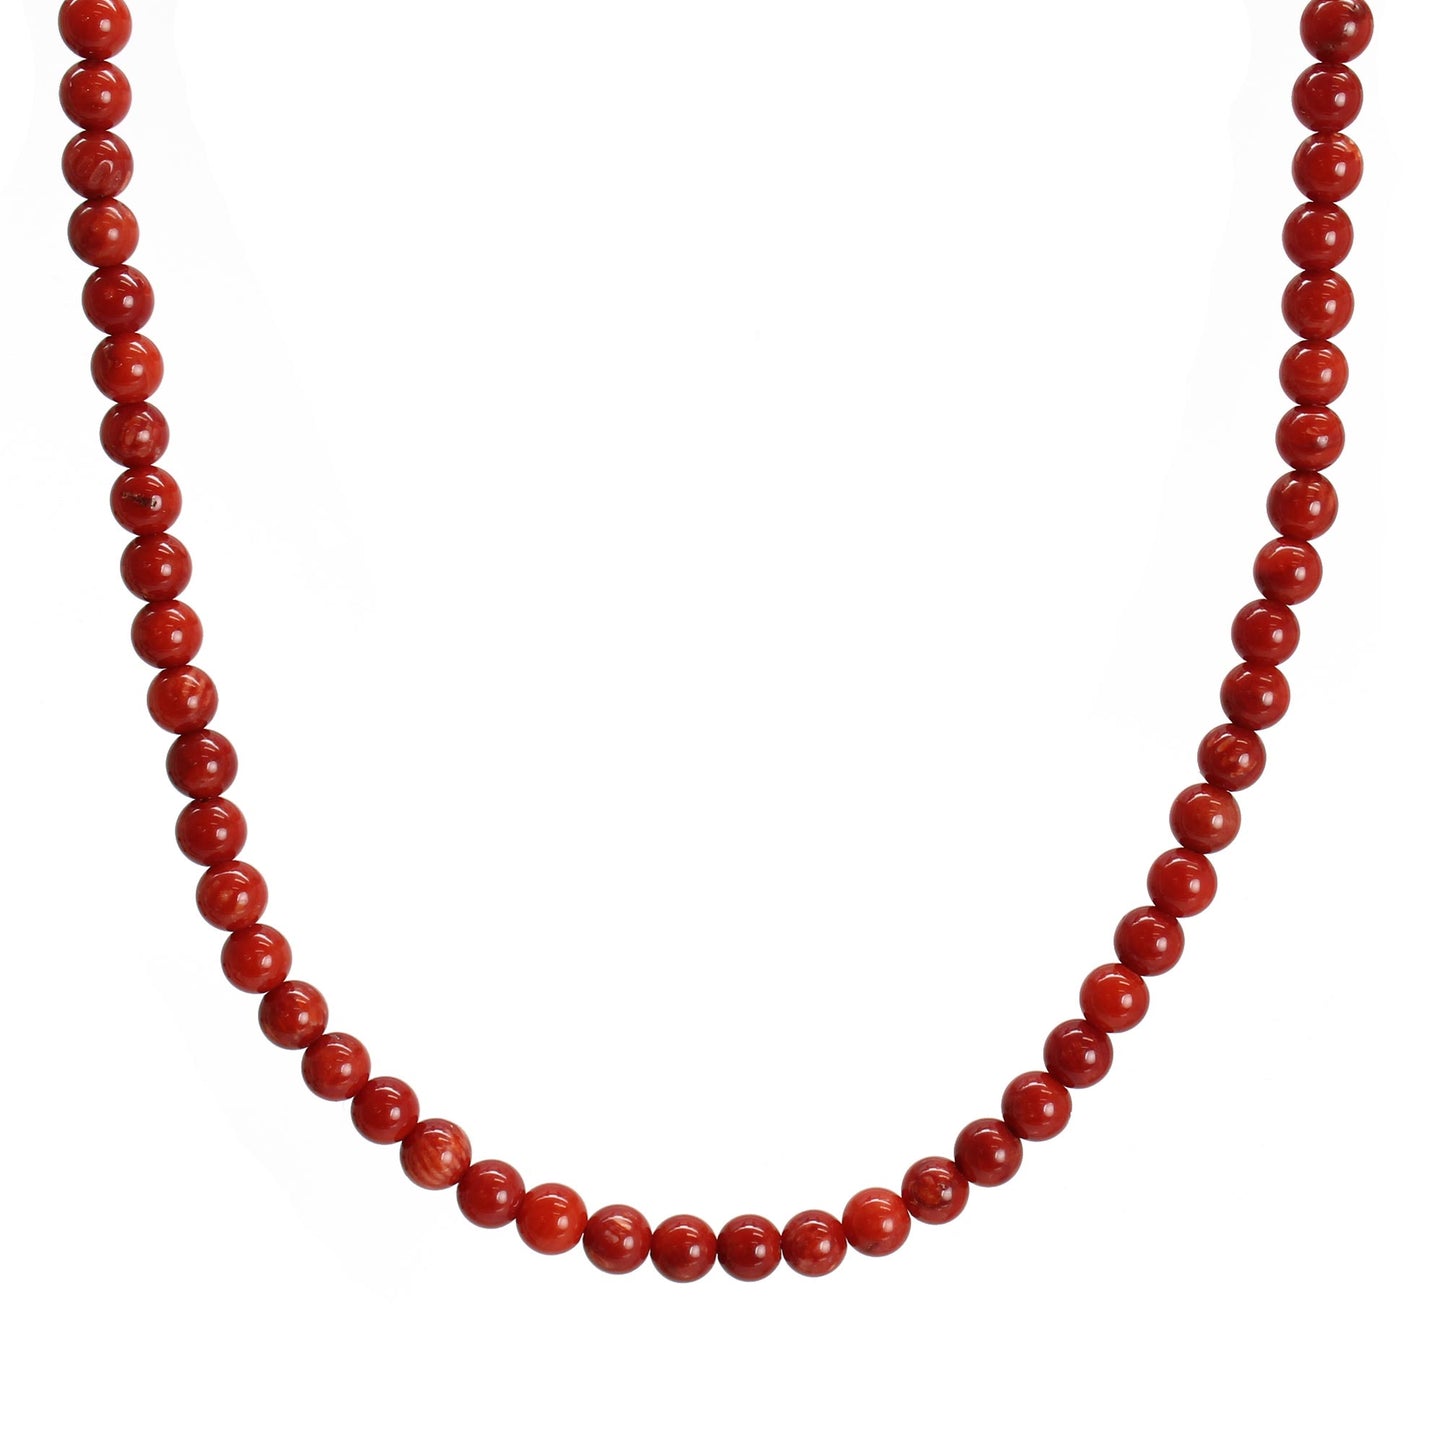 Red Coral Necklace, Small 4mm Beads, Sterling Silver Clasp – Kathy Bankston